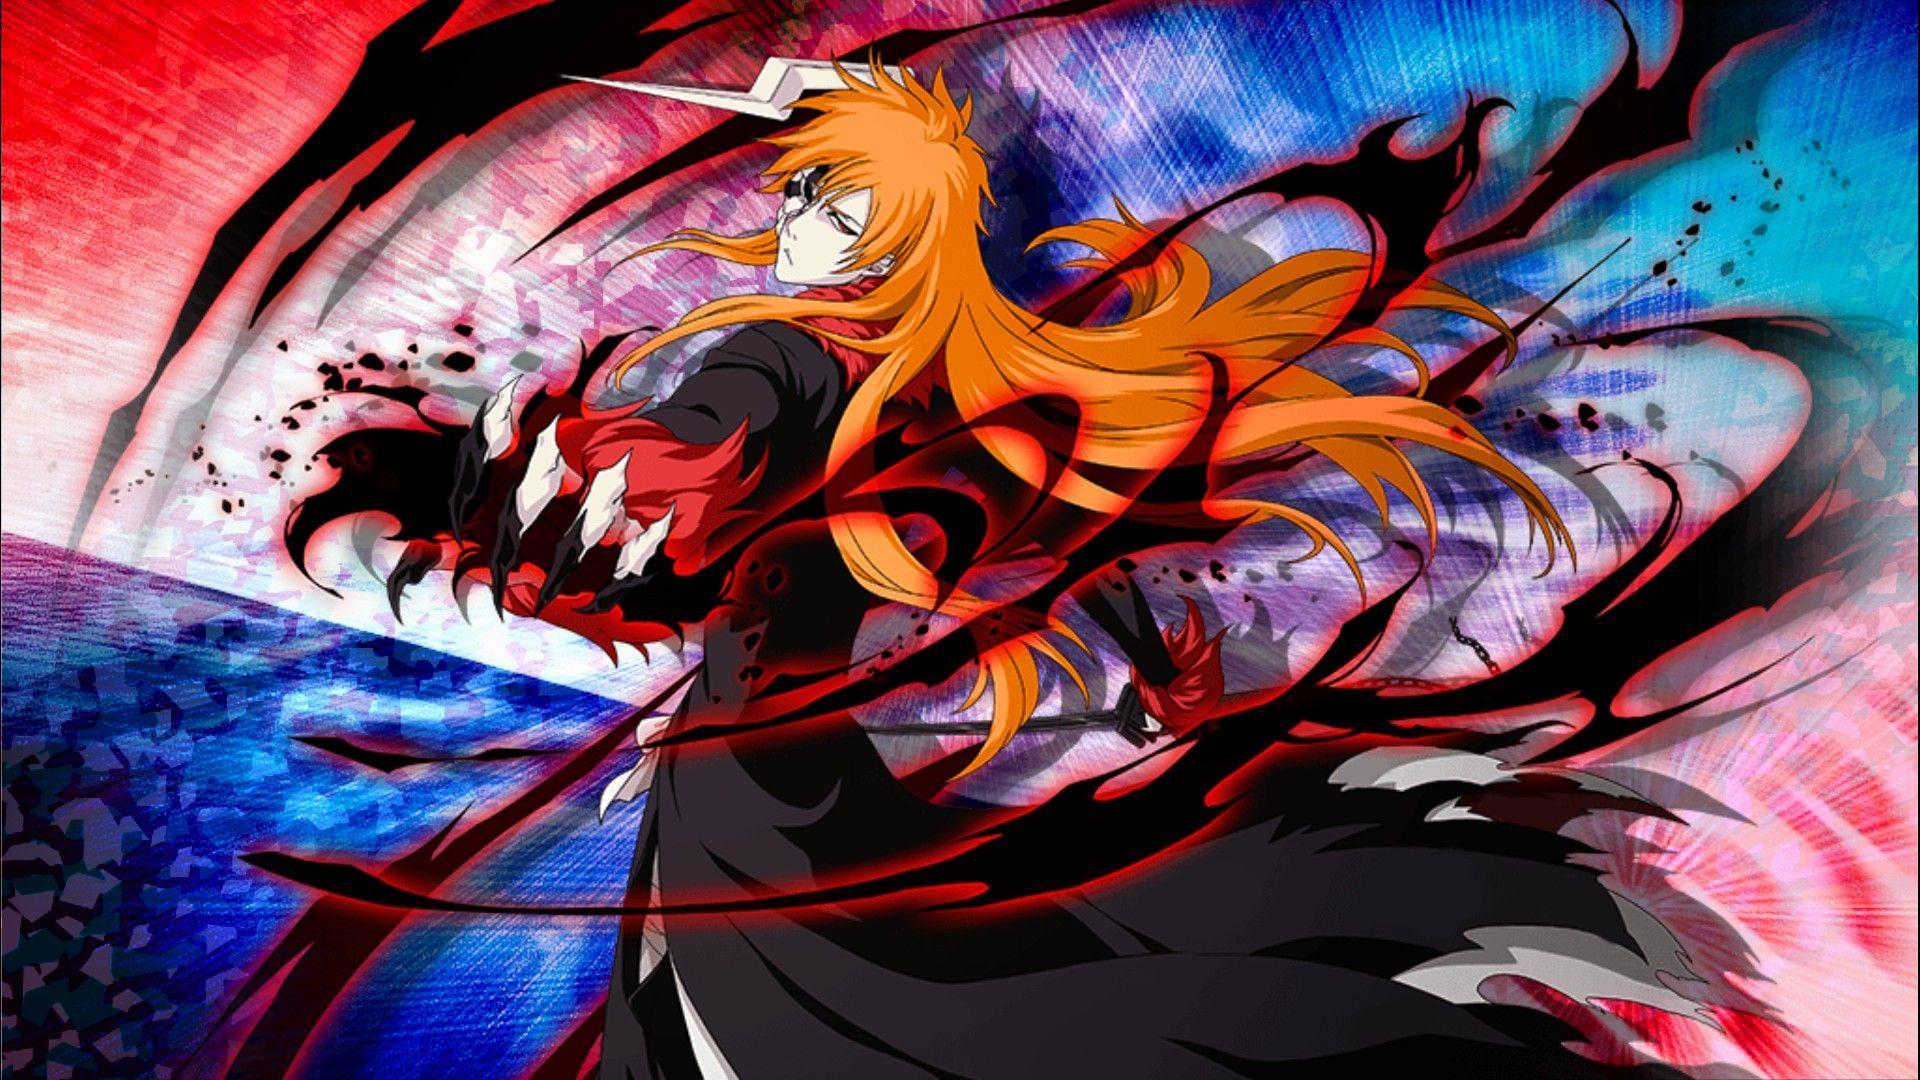 bleach brave souls characters